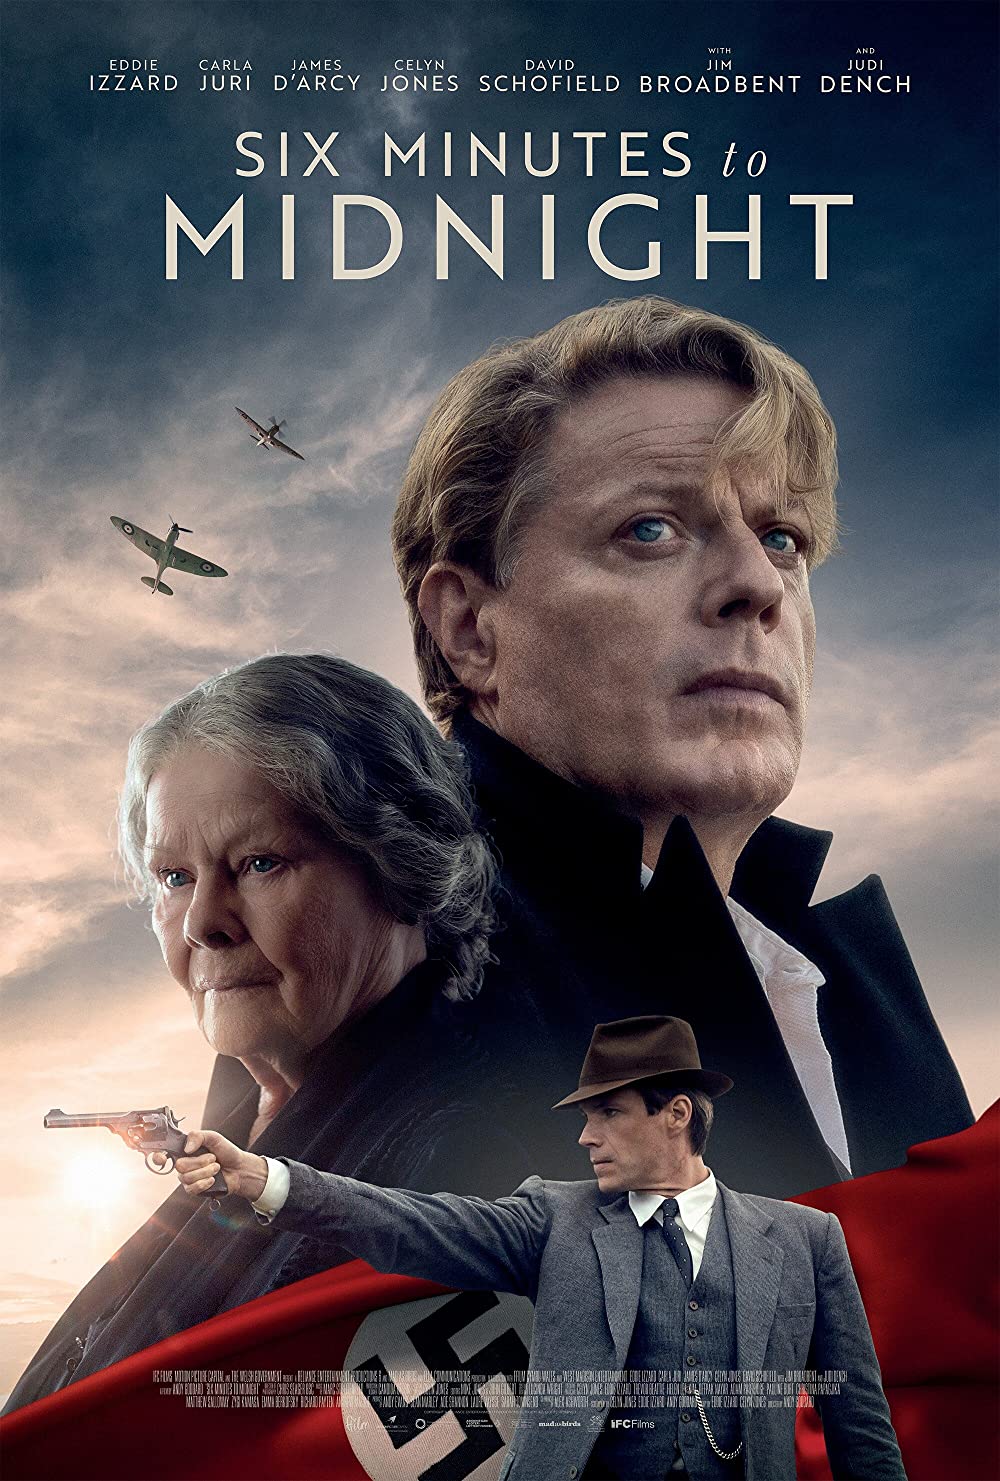 Six Minutes to Midnight Movie 2022, Official Trailer, Release Date, HD Poster